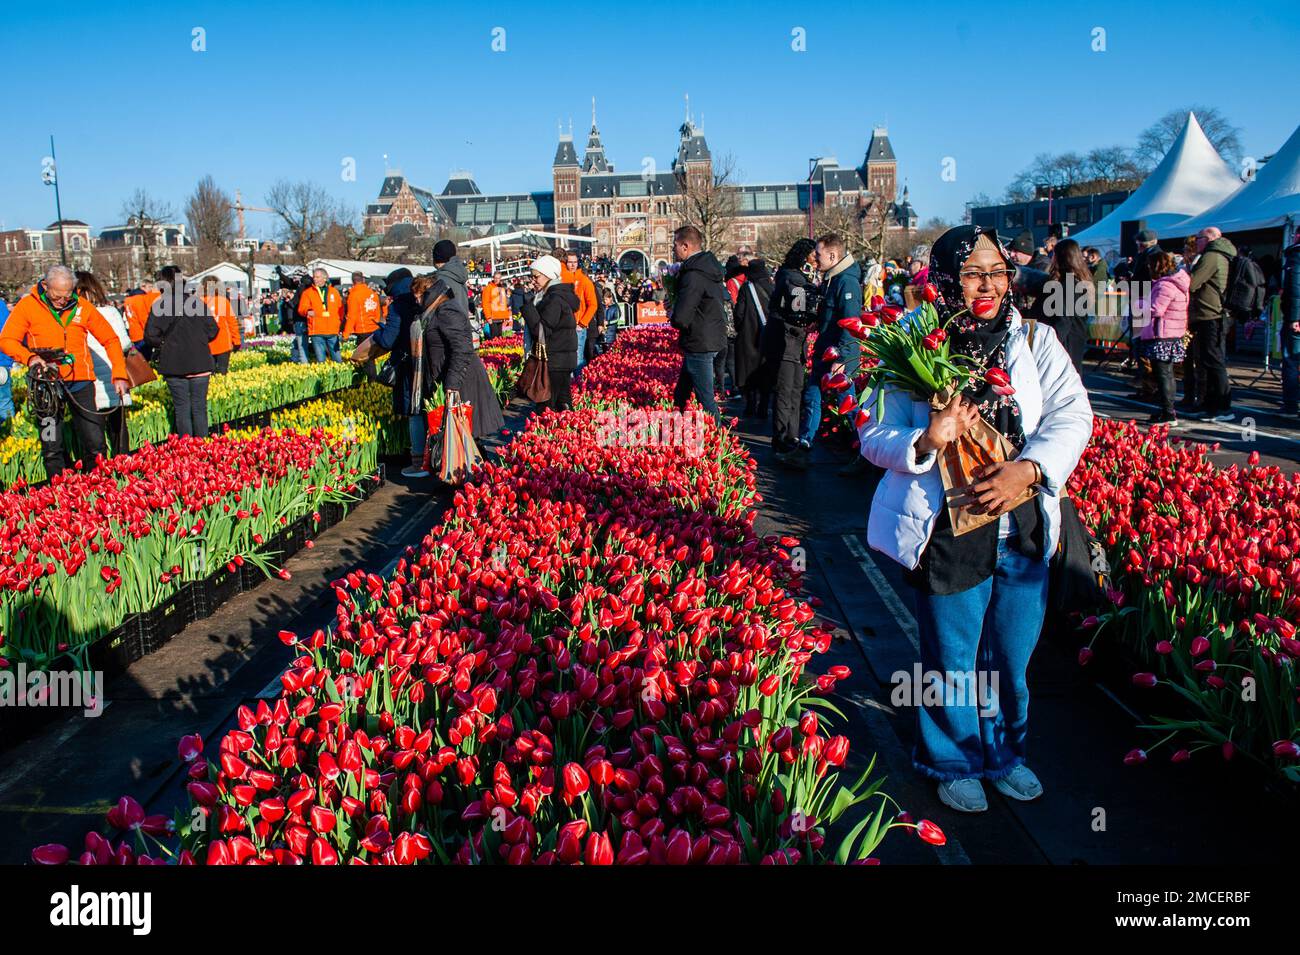 A woman seen posing with her tulips. Each year on the 3rd Saturday of January, the National Tulip Day is celebrated in Amsterdam. Dutch tulip growers built a huge picking garden with more than 200,000 colorful tulips at the Museumplein in Amsterdam. Visitors are allowed to pick tulips for free. The event was opened by Olympic skating champion, Irene Schouten. Prior to the opening, she christened a new tulip: Tulipa 'Dutch Pearl' as a reference to the world - famous painting 'The girl with a pearl earring' by Johannes Vermeer. Stock Photo